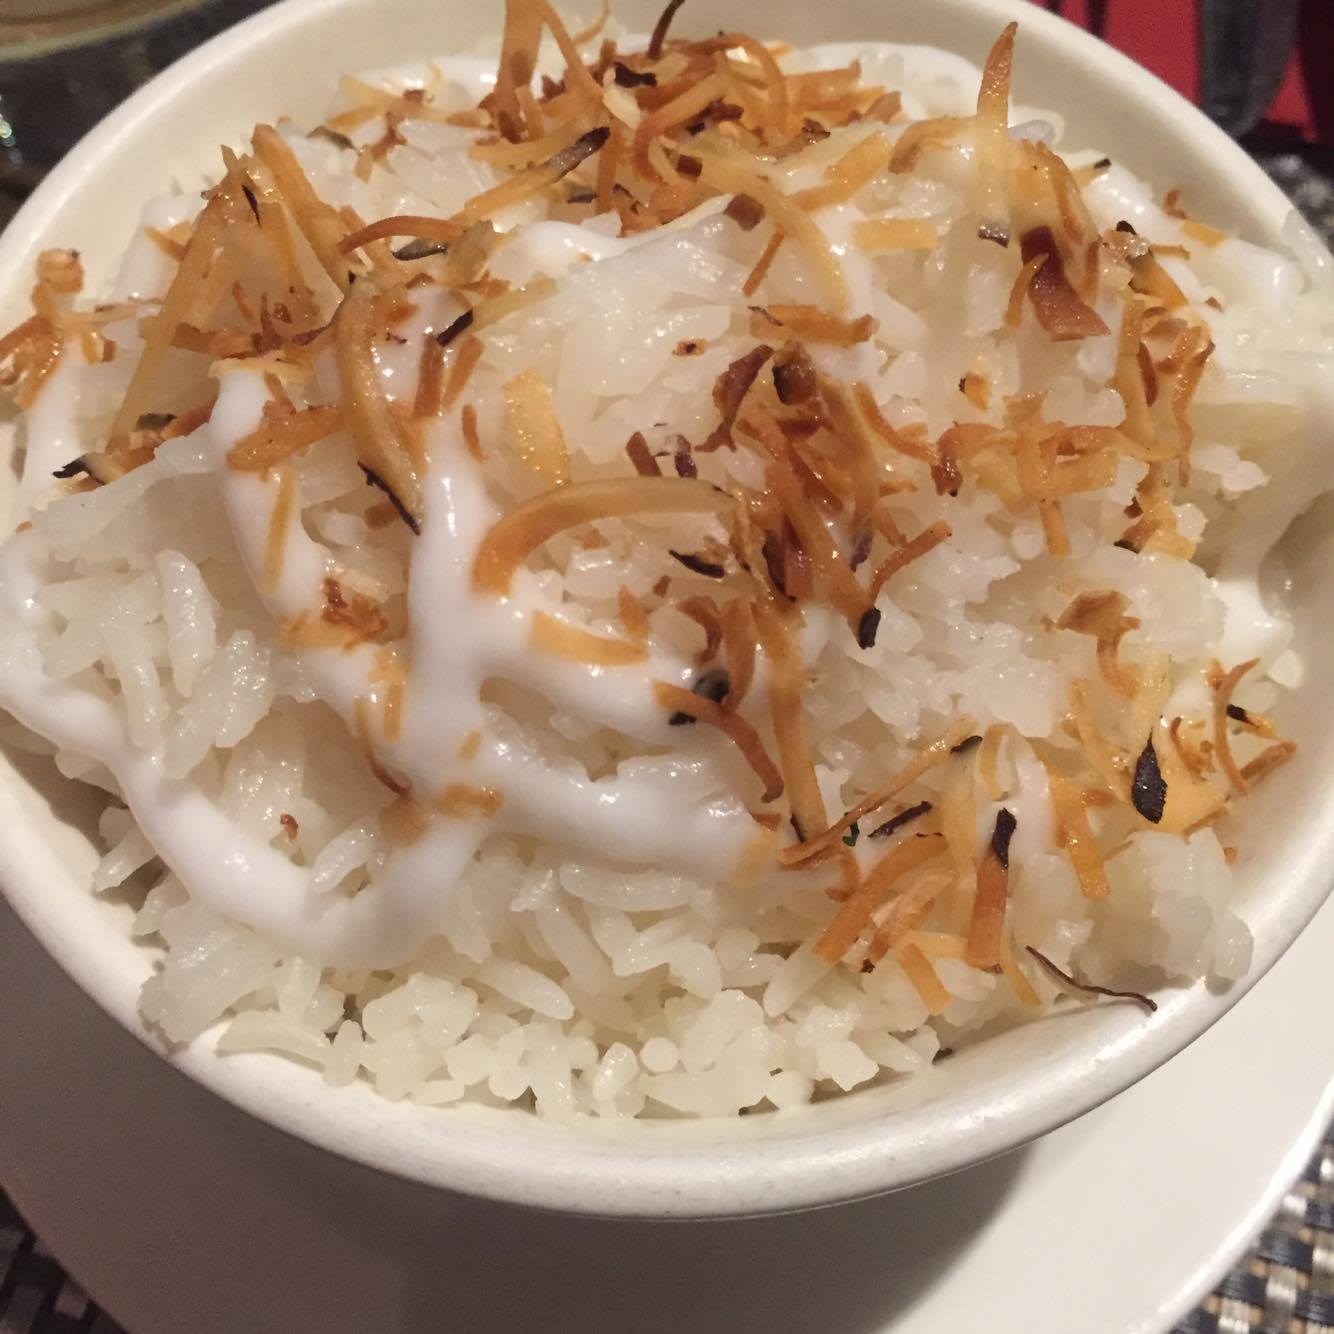 Side dish of coconut rice drizzled with coconut cream